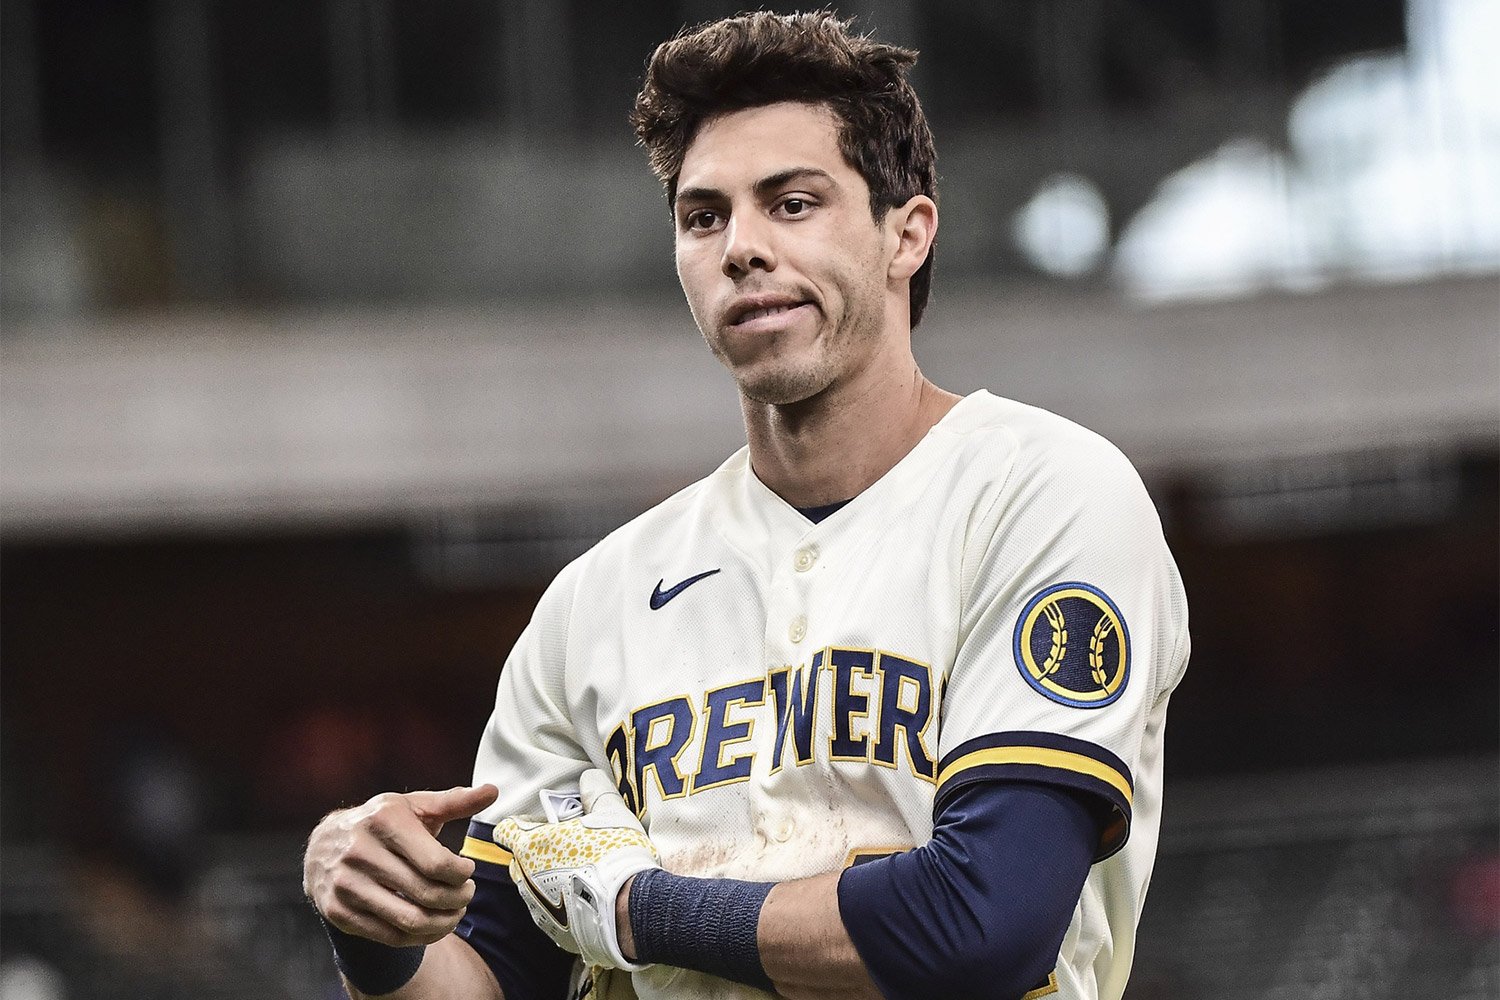 Will the real Christian Yelich please stand up? - Brewers - Brewer Fanatic